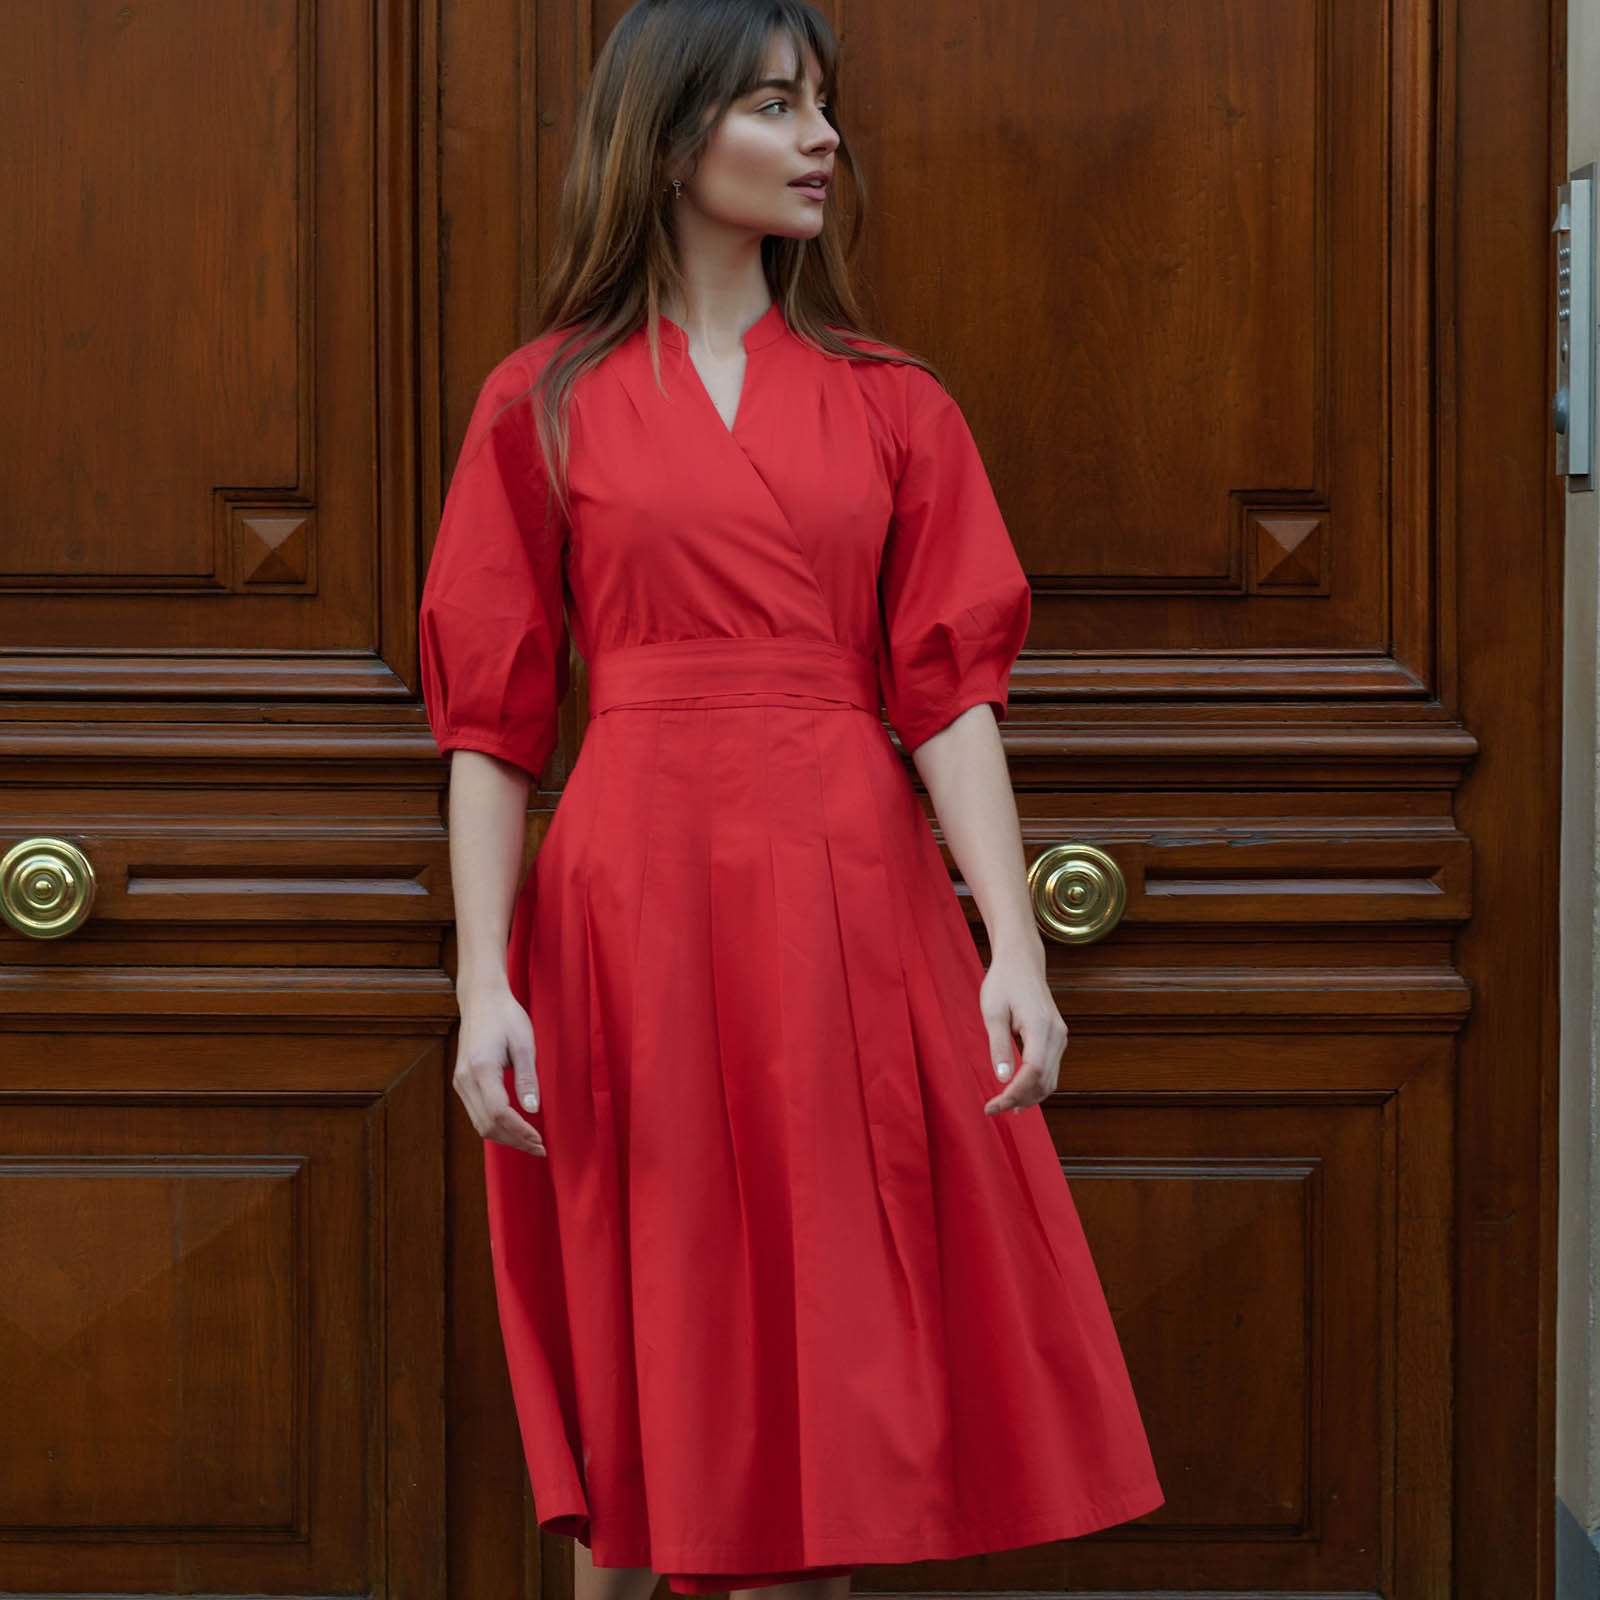 Midi dresses: A must-have for your luxury clothing collection